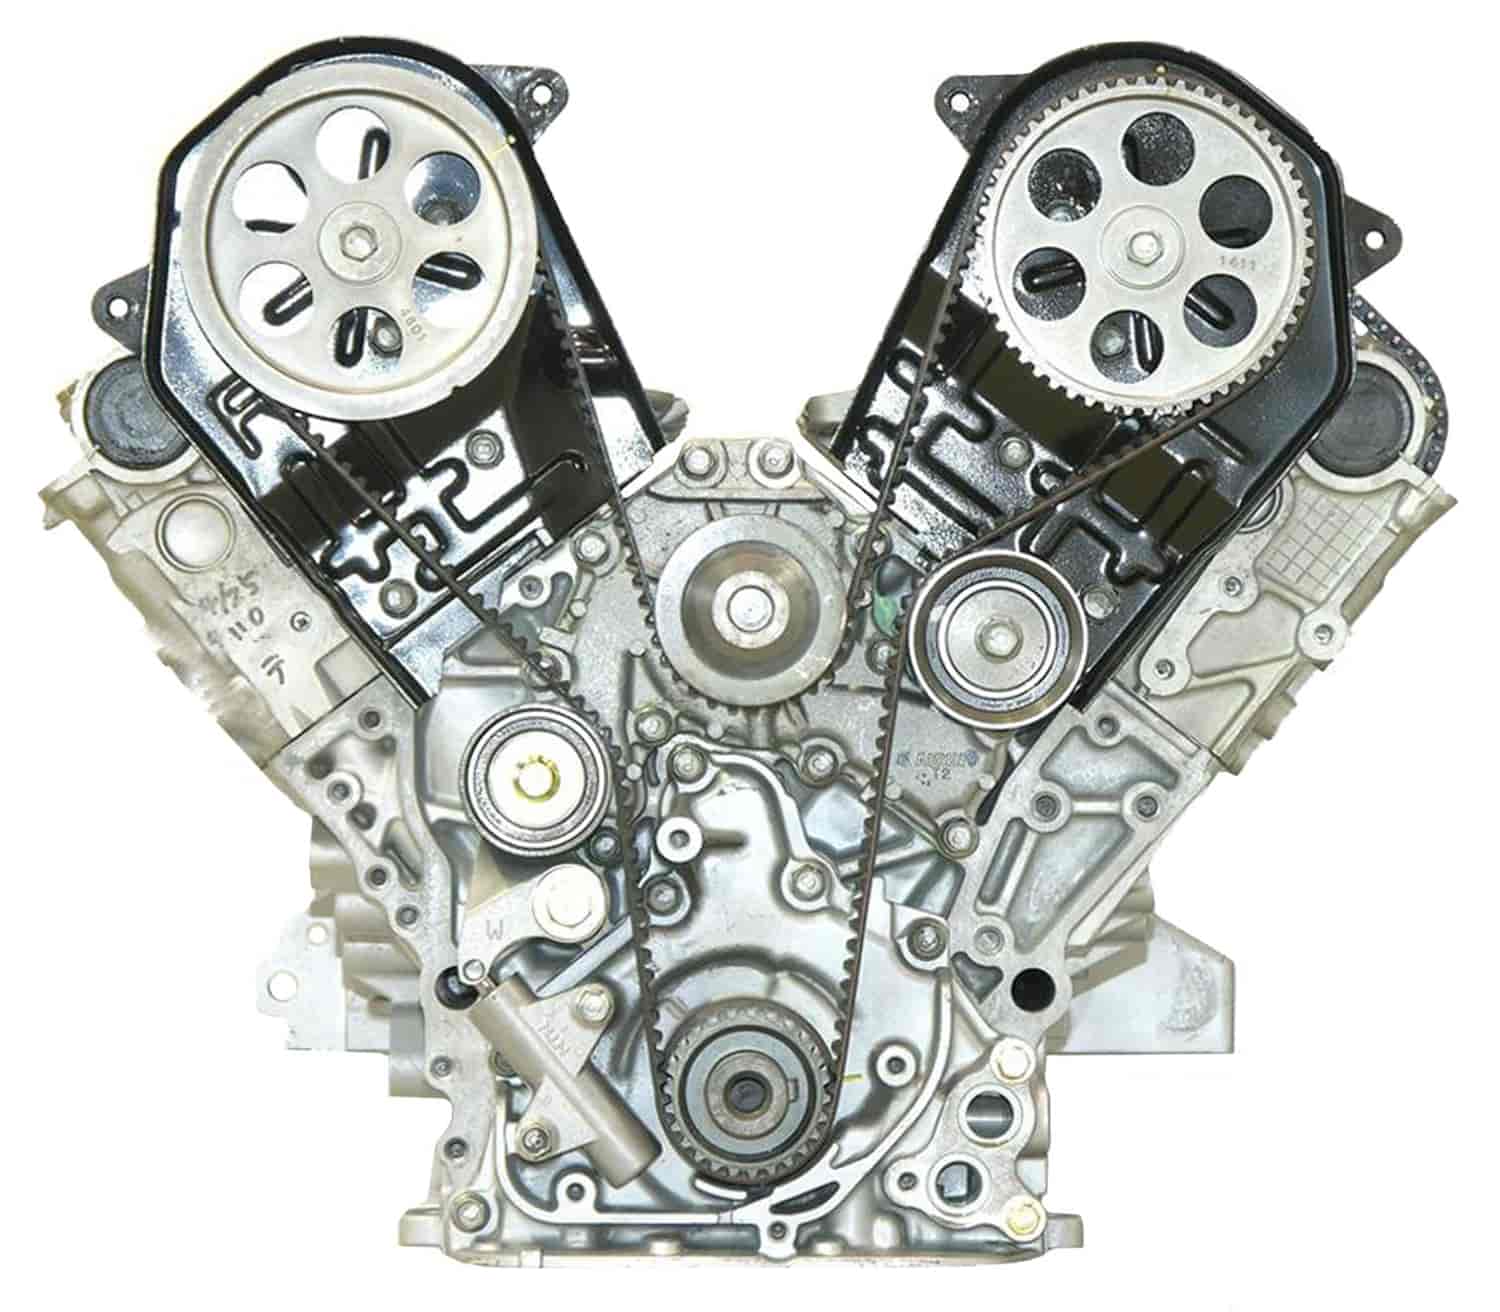 Remanufactured Crate Engine for 1992-1995 Isuzu Rodeo & Trooper with 3.2L V6